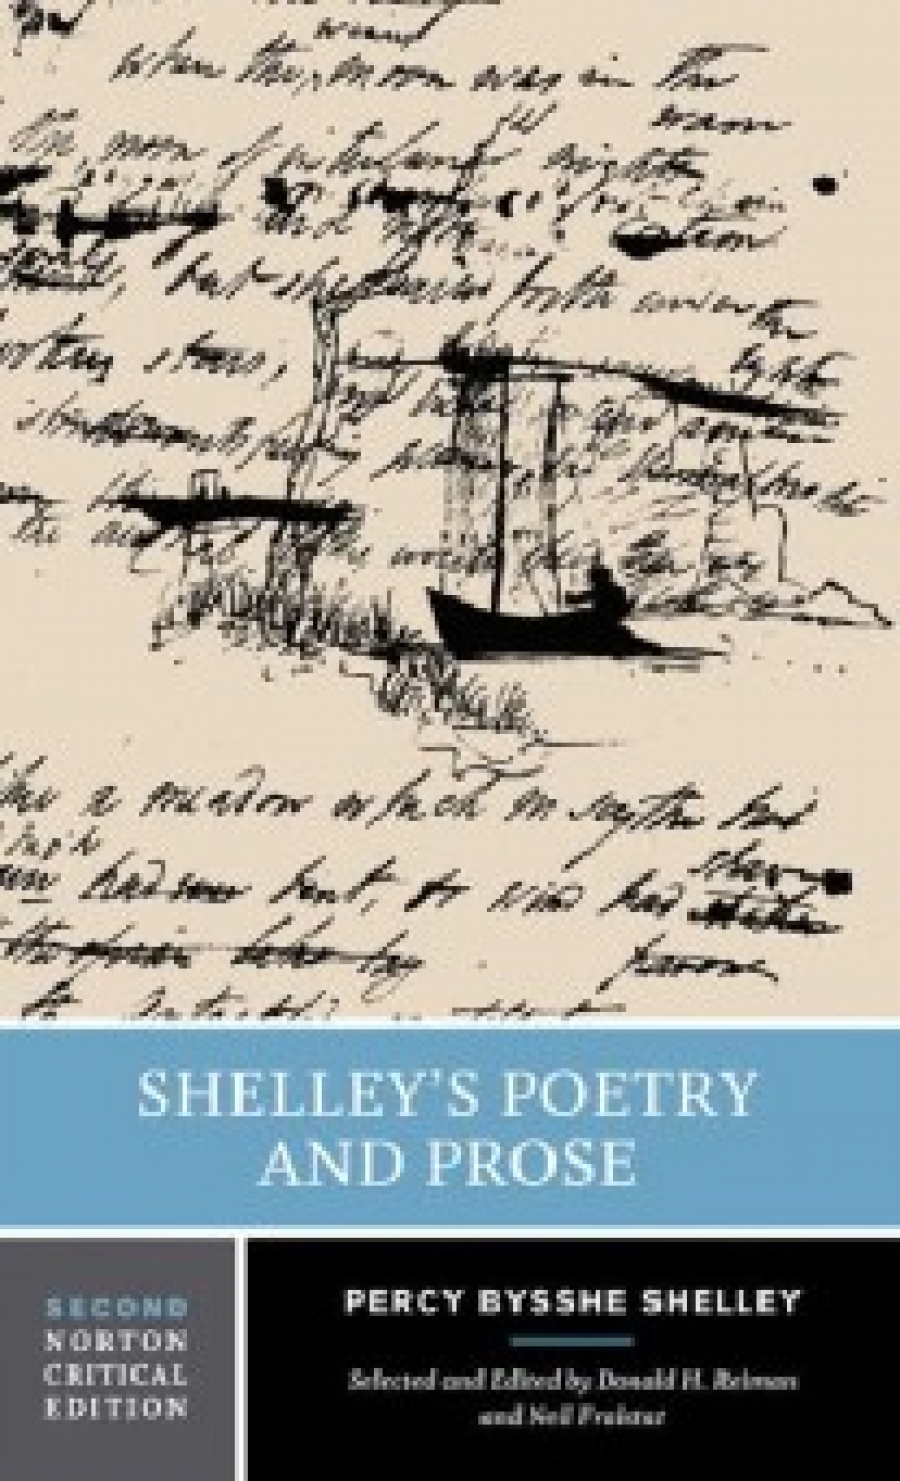 Shelley, Percy Bysshe Shelley's poetry and prose 